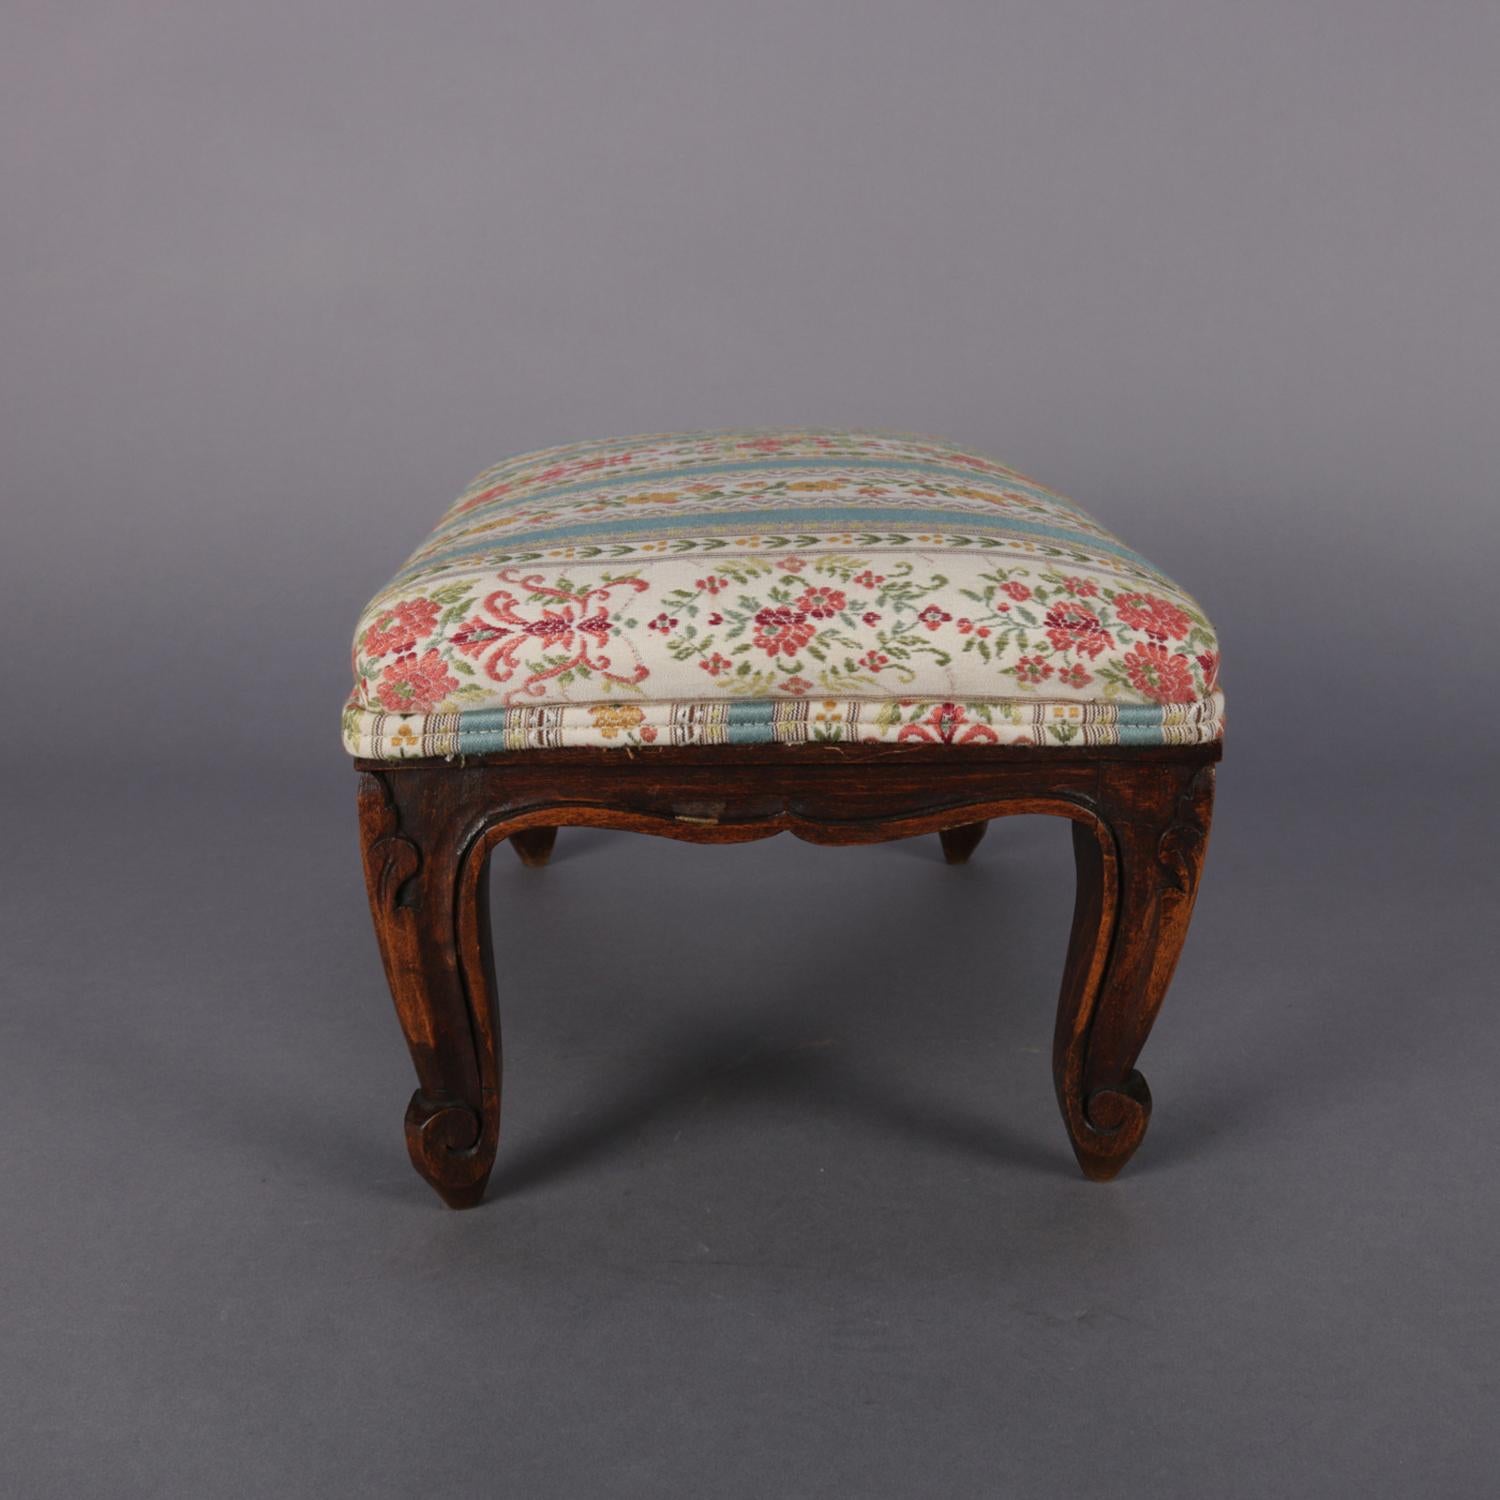 20th Century Antique Petite French Louis XVI Carved Walnut Upholstered Footstool, circa 1900